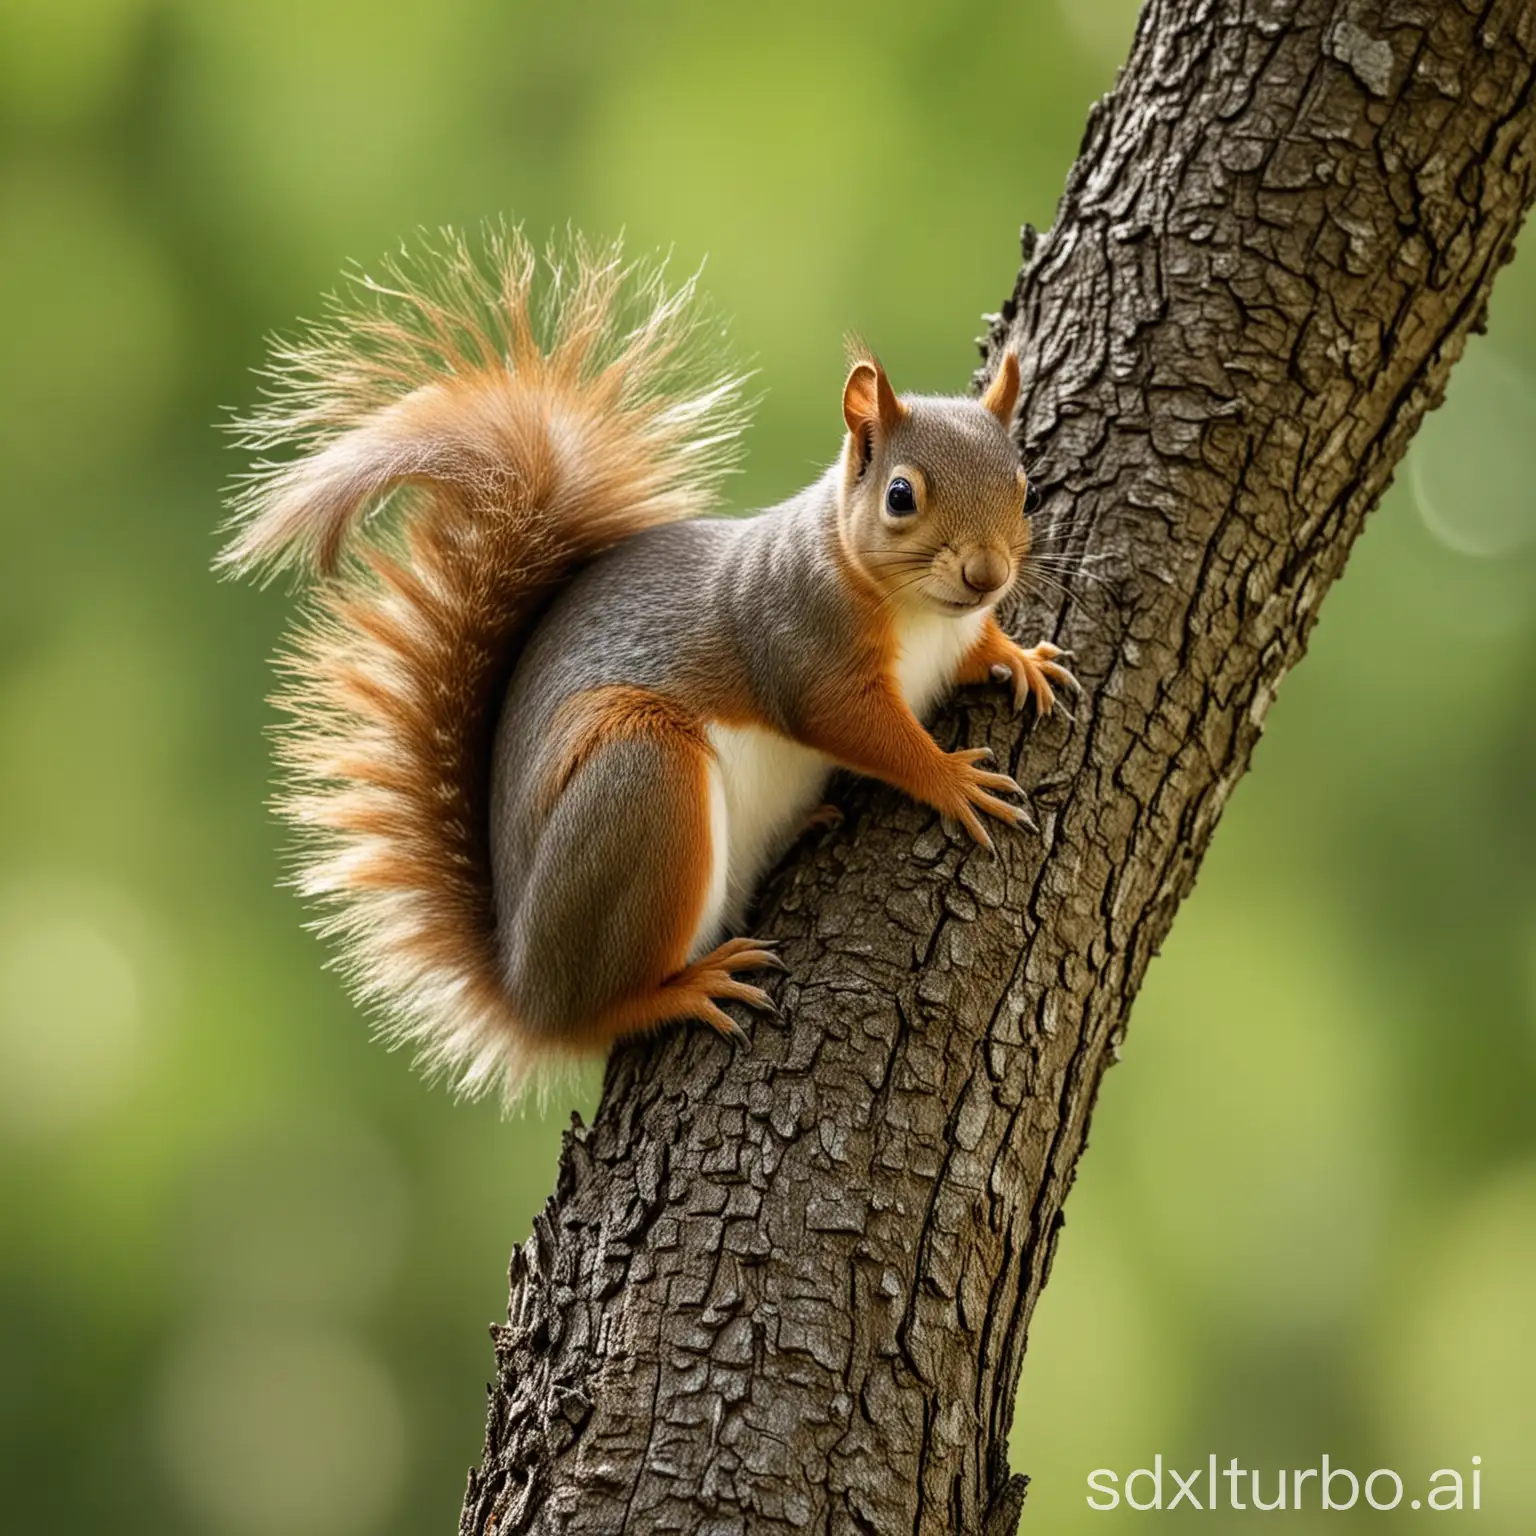 Summer-Tree-Scene-Squirrel-Perched-on-Branch